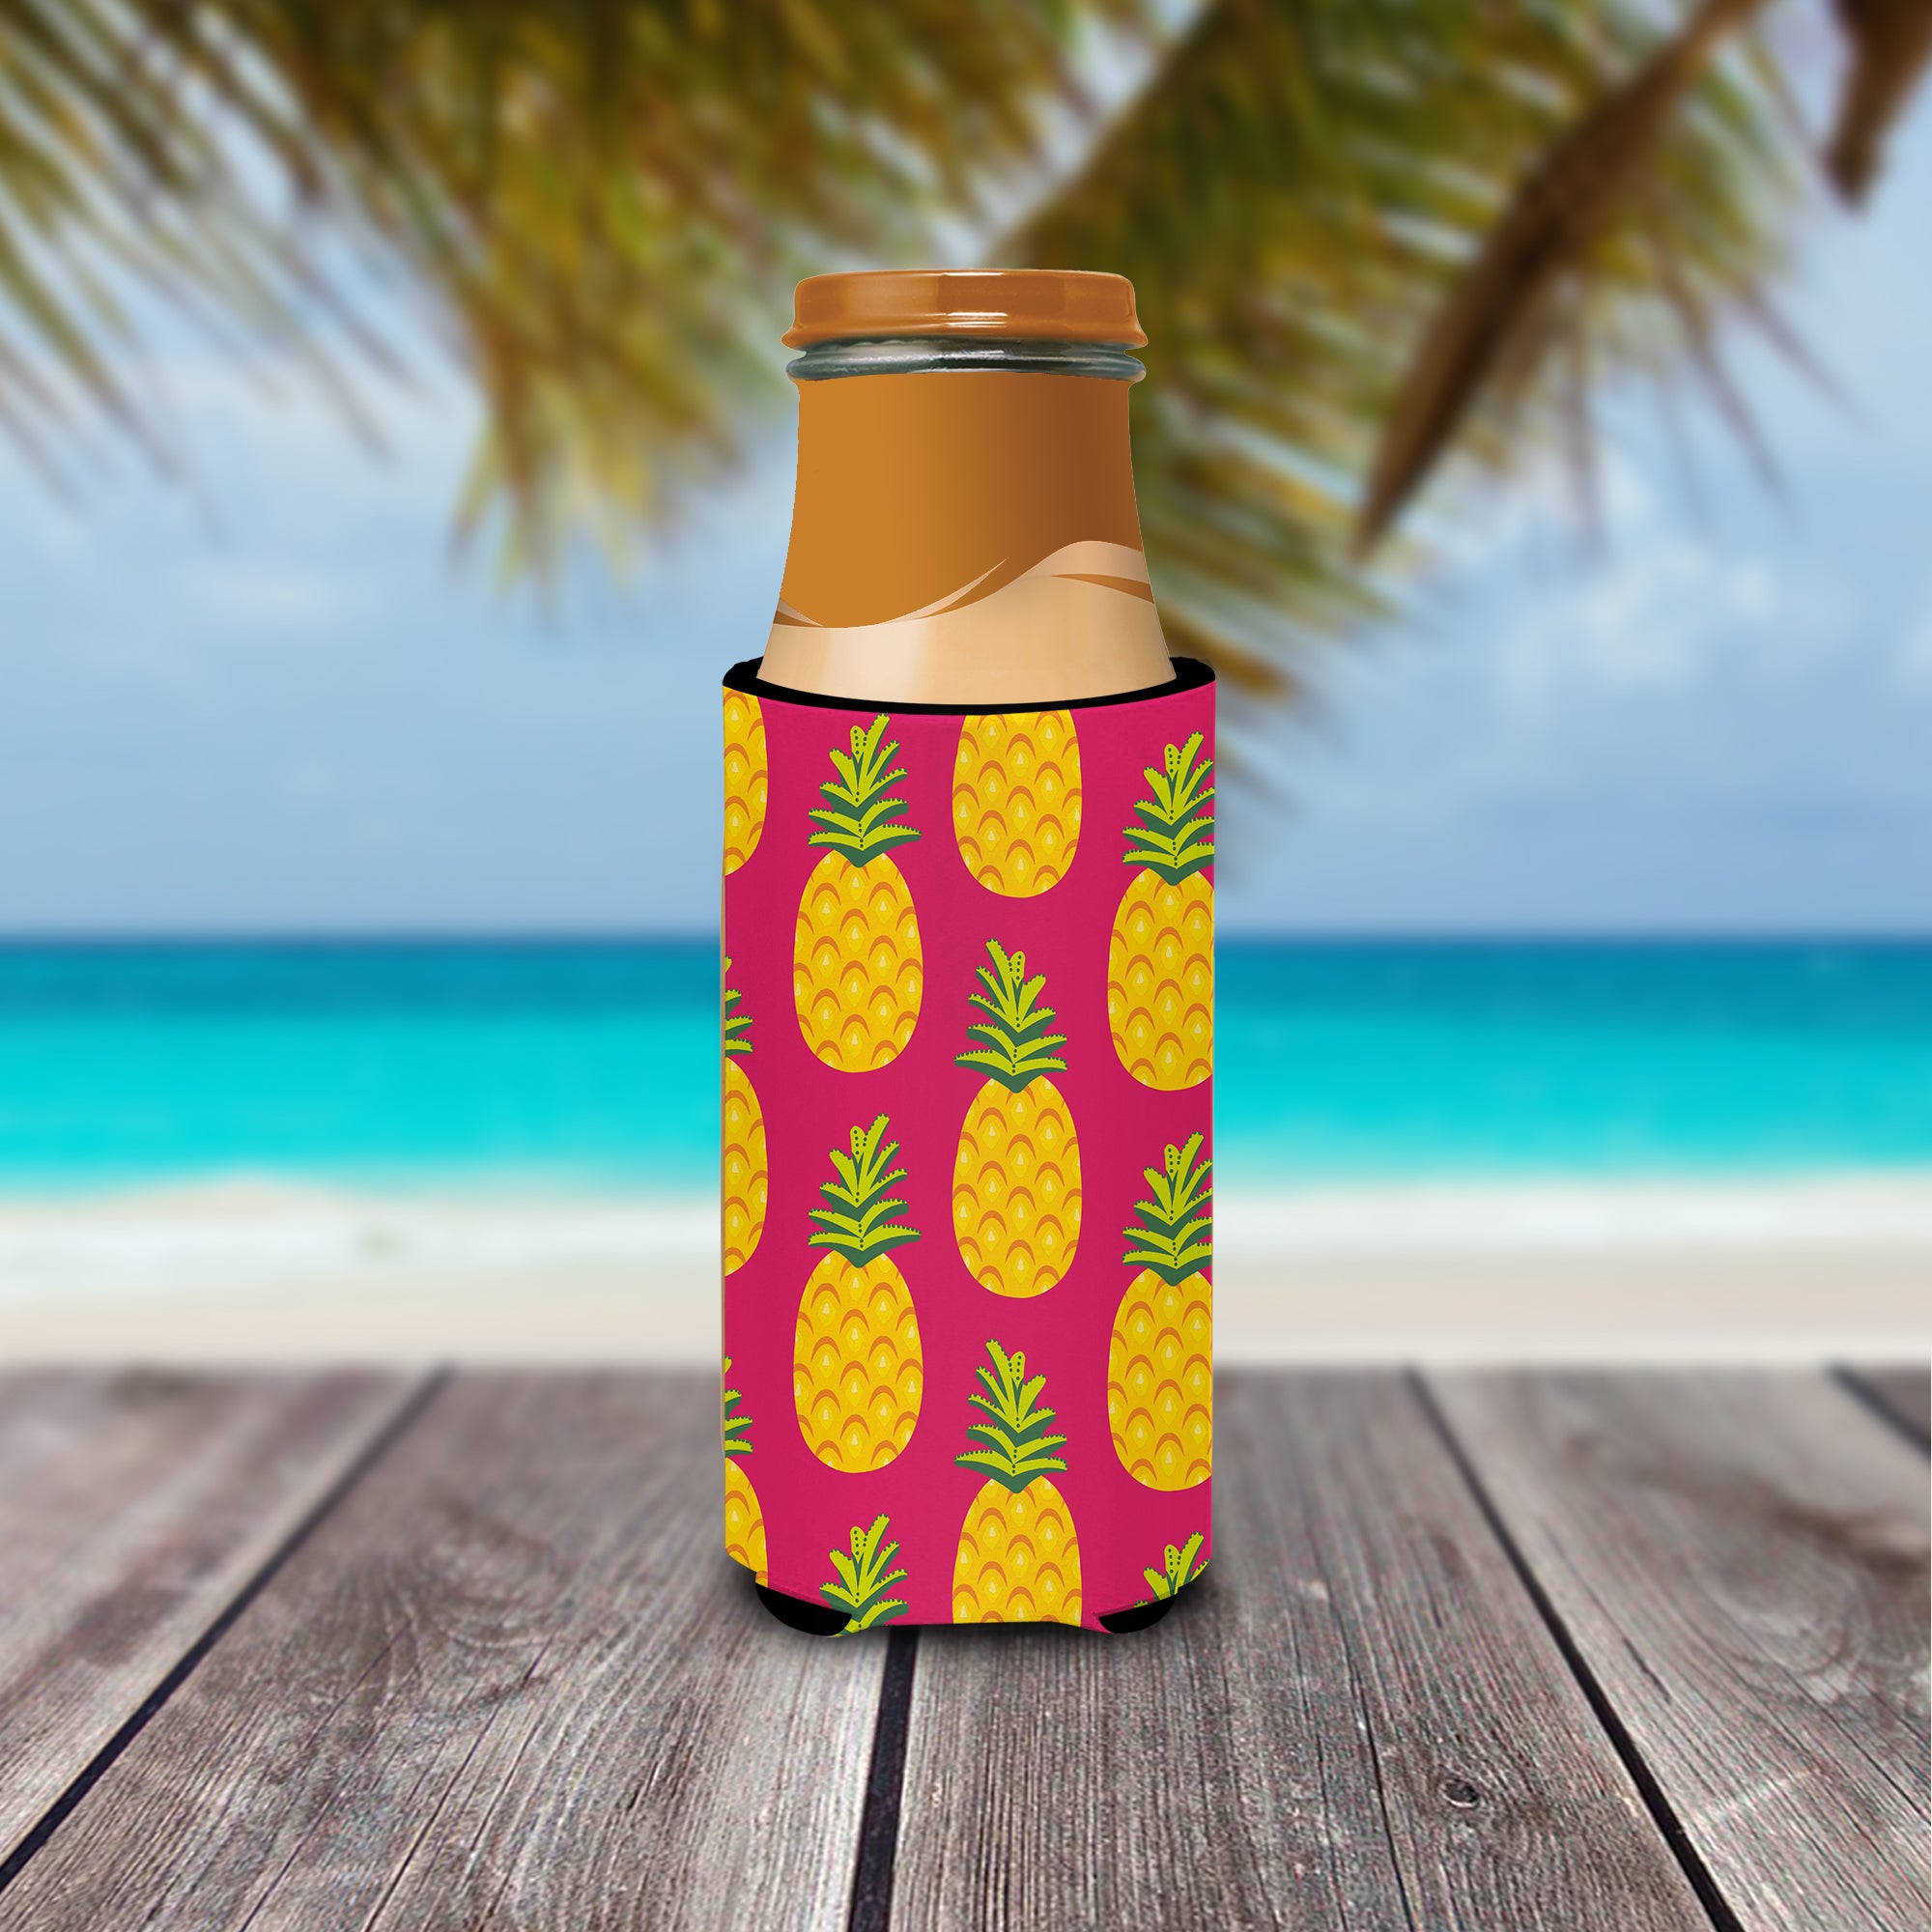 Pineapples on Pink  Ultra Hugger for slim cans BB5136MUK  the-store.com.